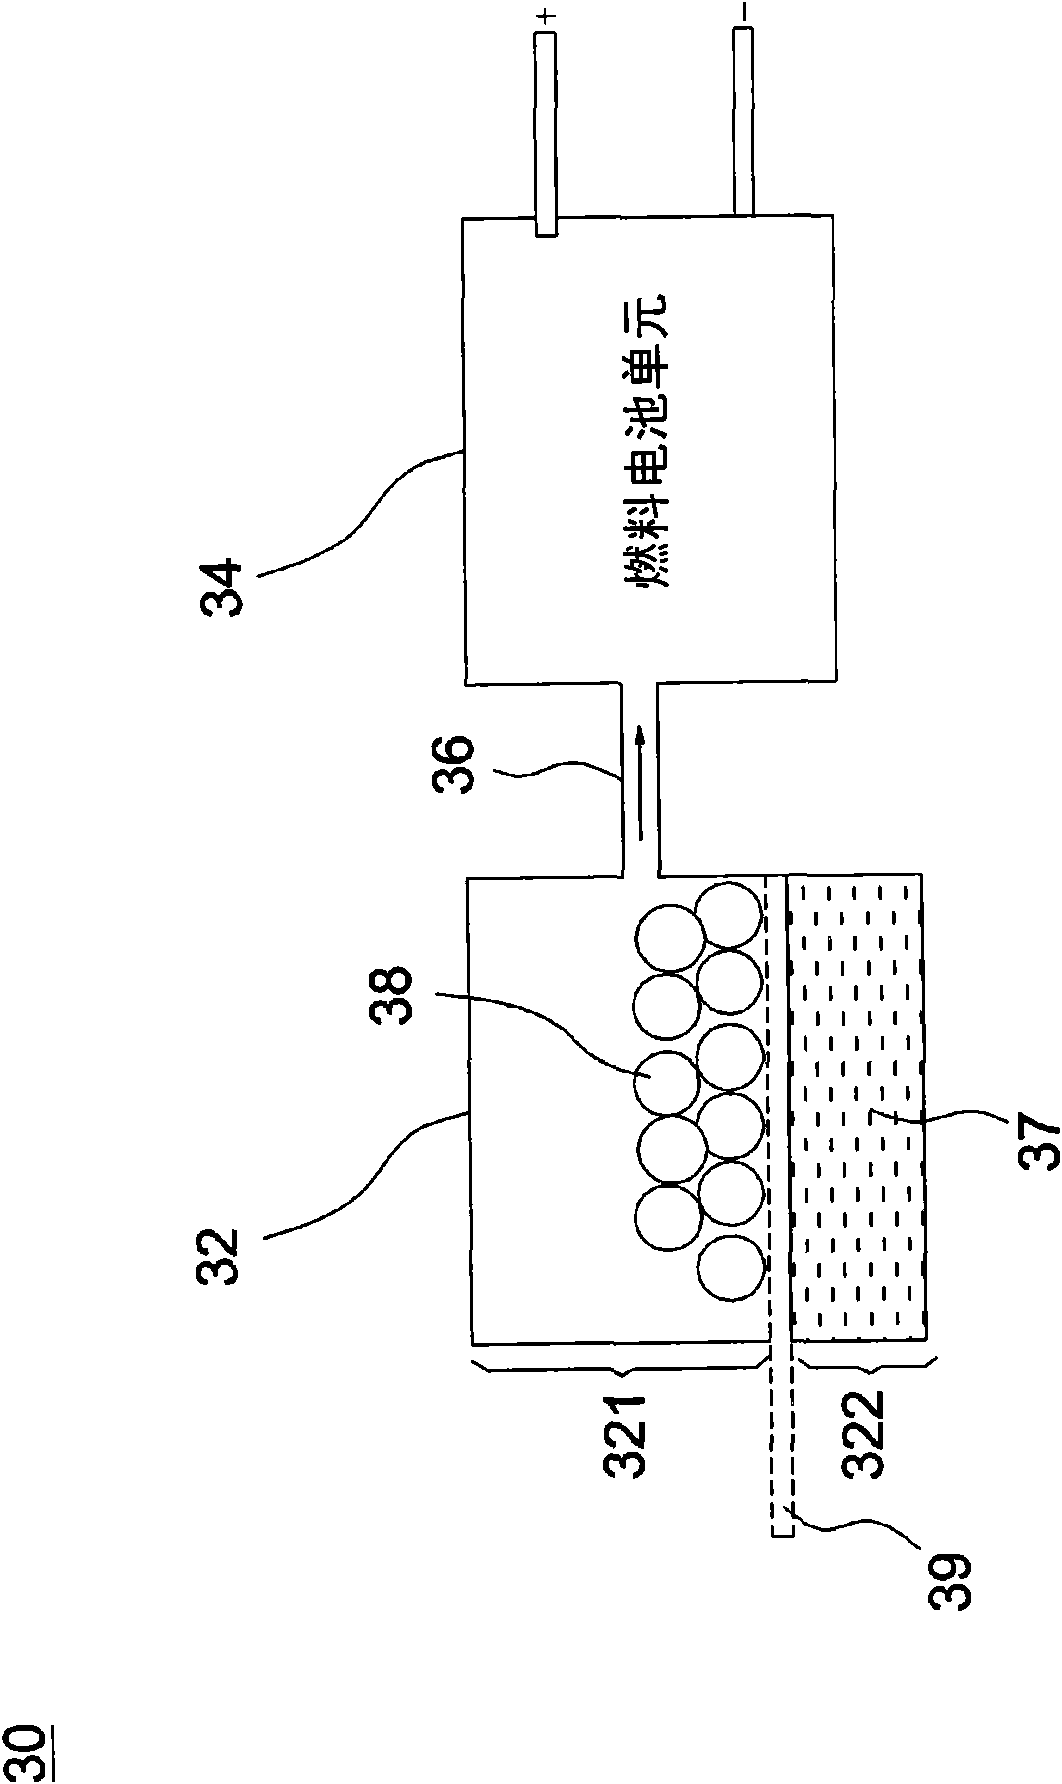 Hydrogen power supply module and life saving device